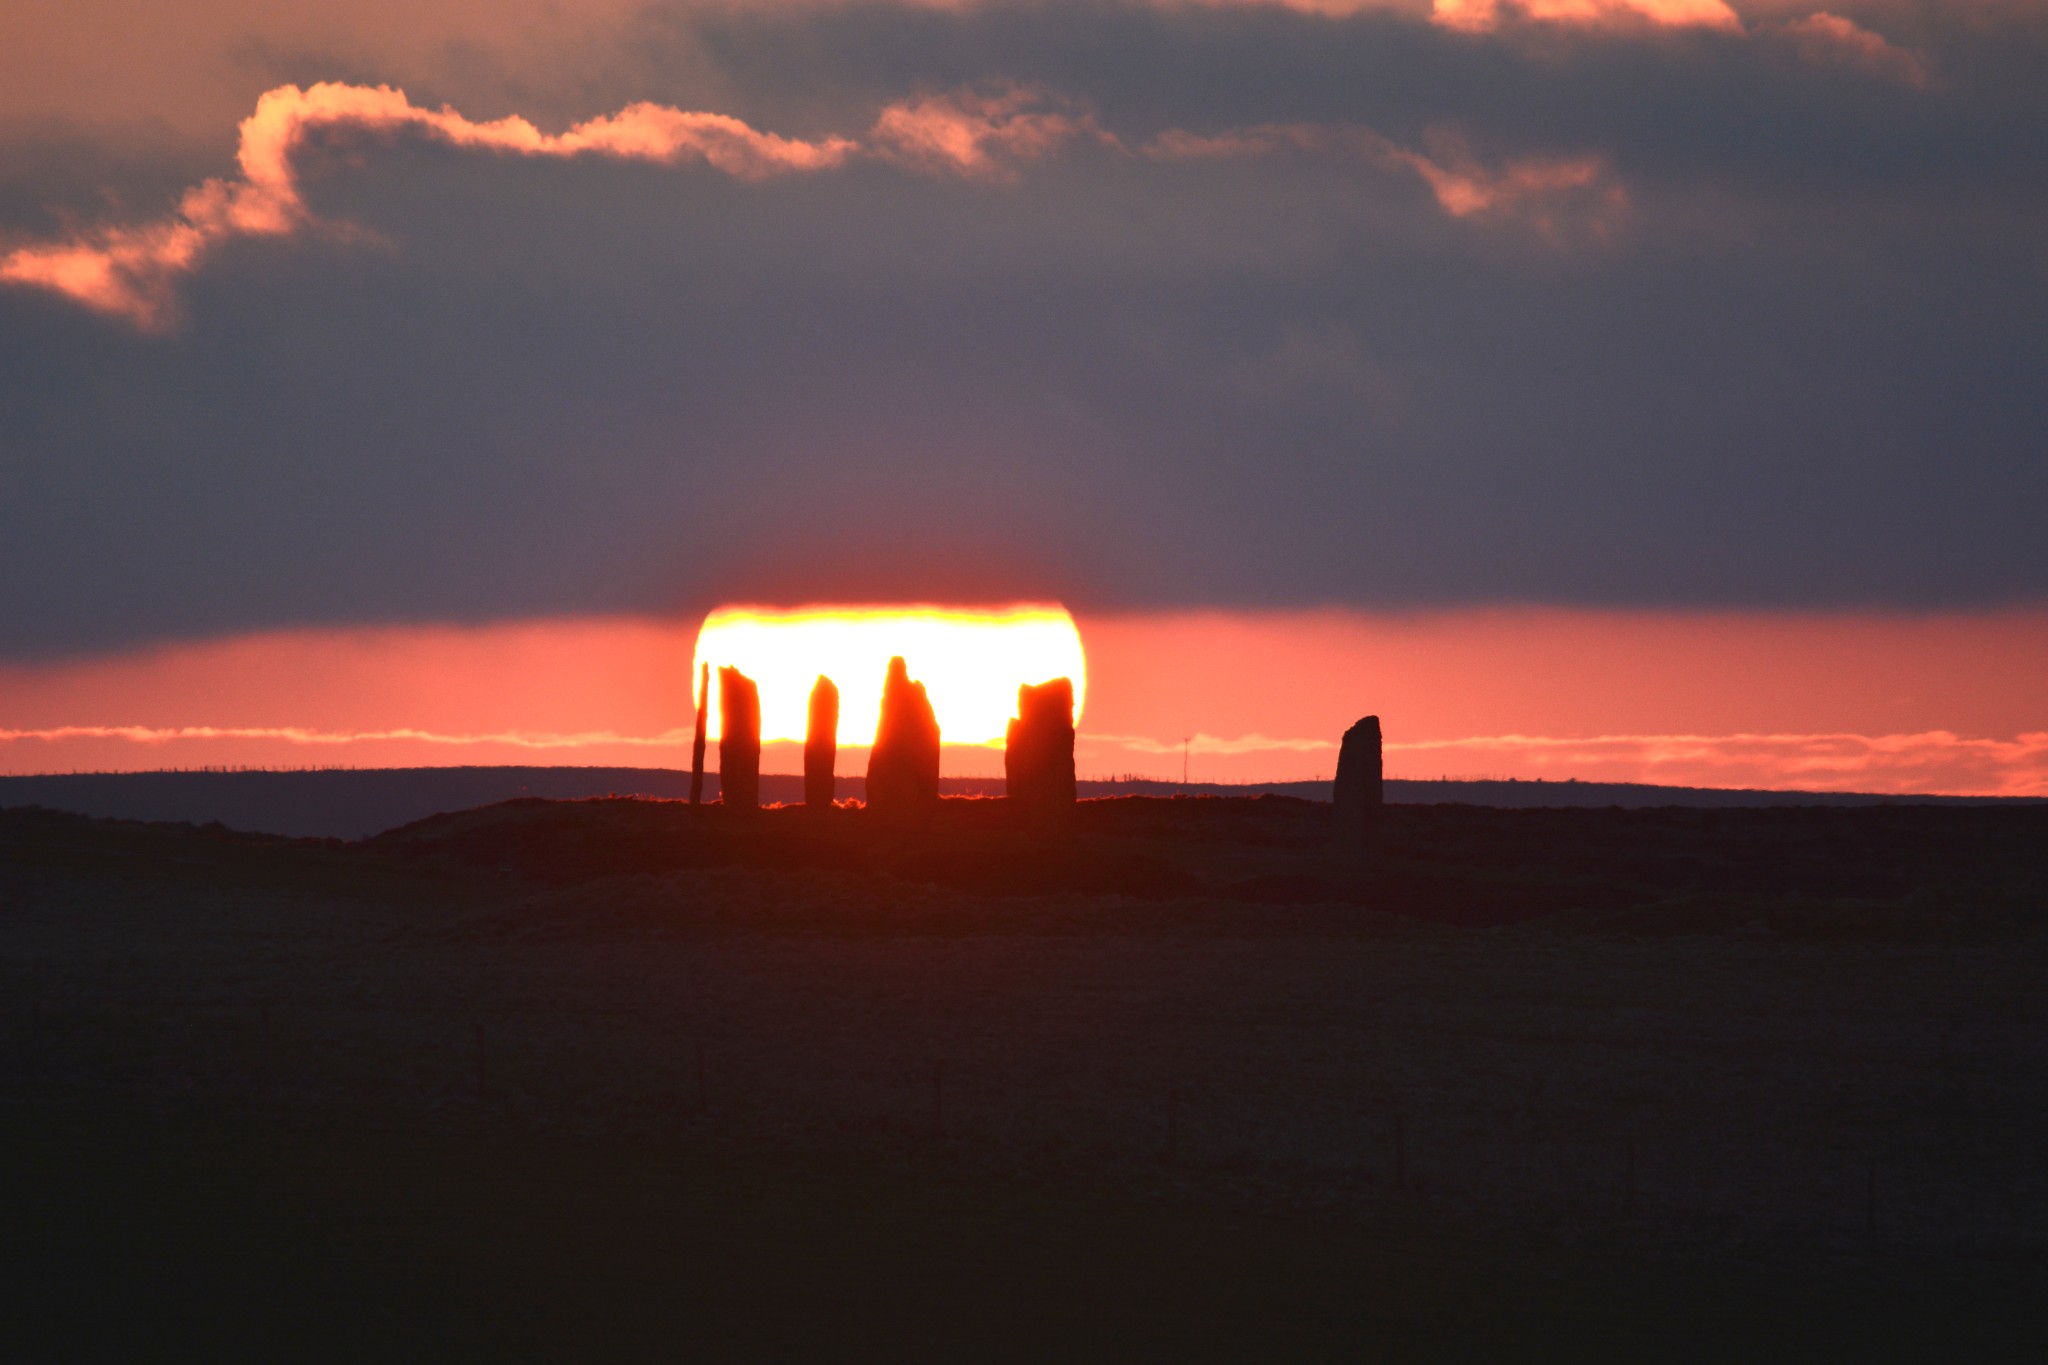 Sunset over the Ring of Brodgar, Orkney - image by Nick Card